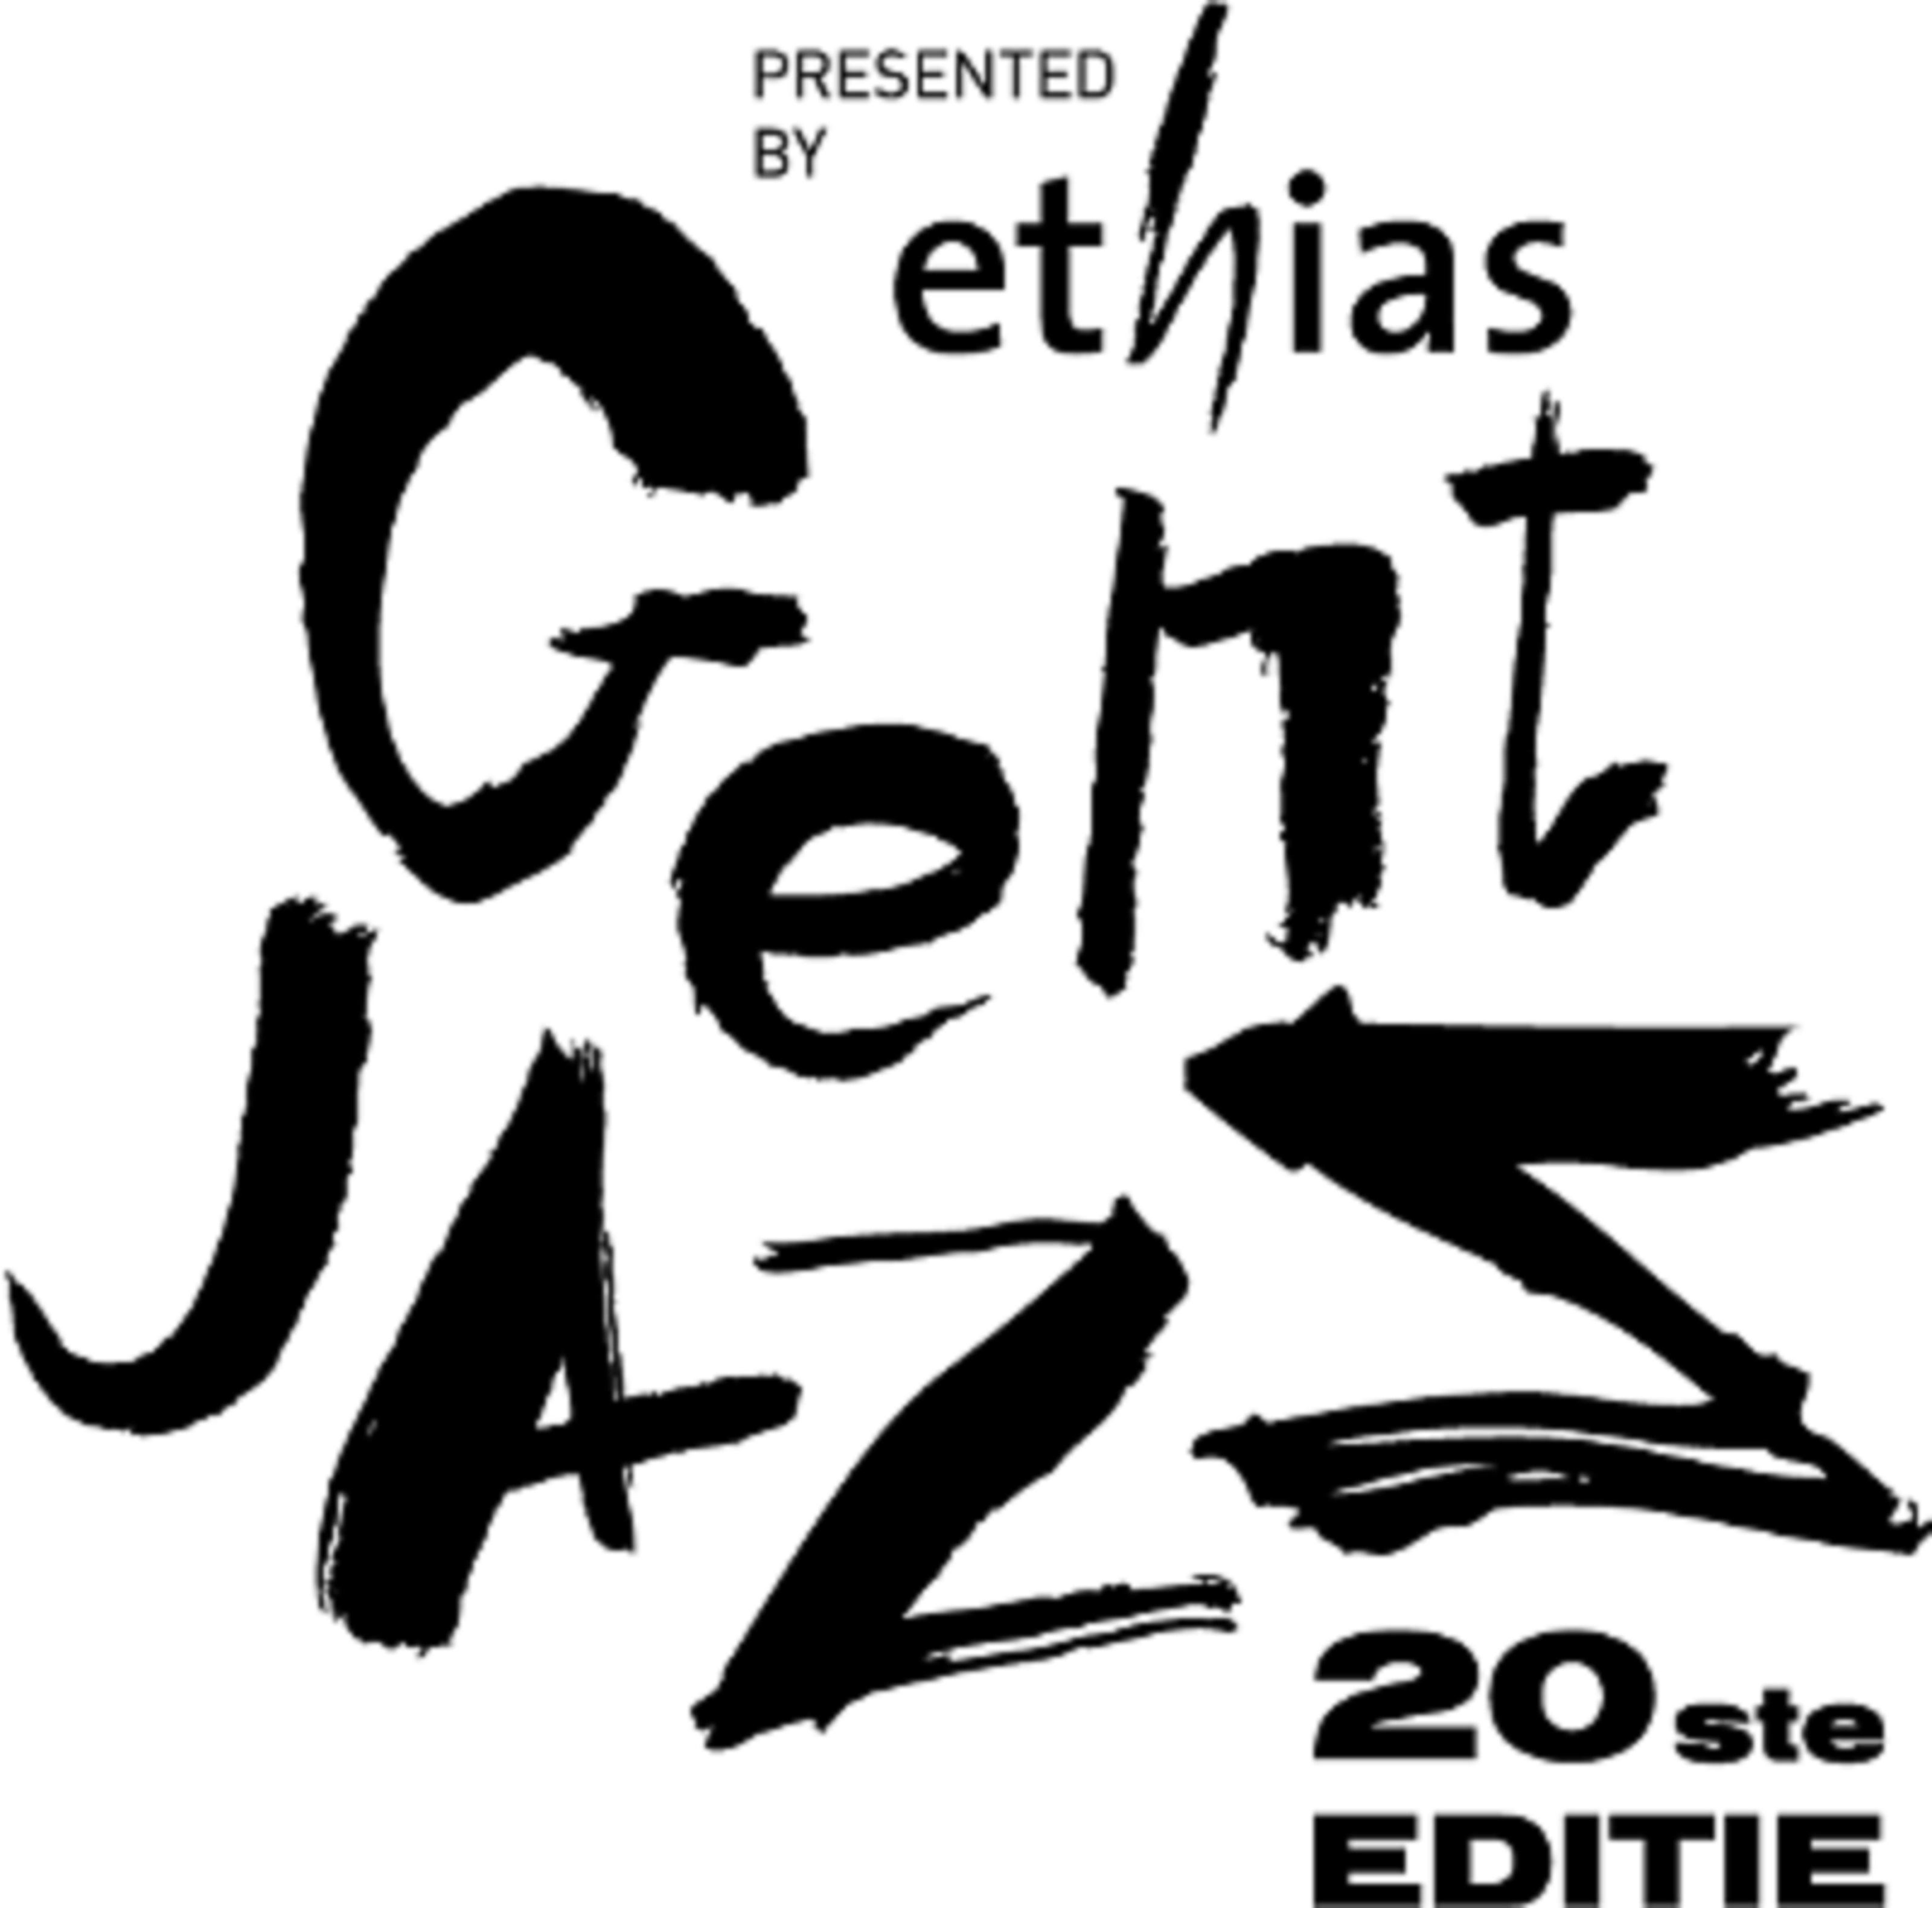 Gent Jazz skips another year...